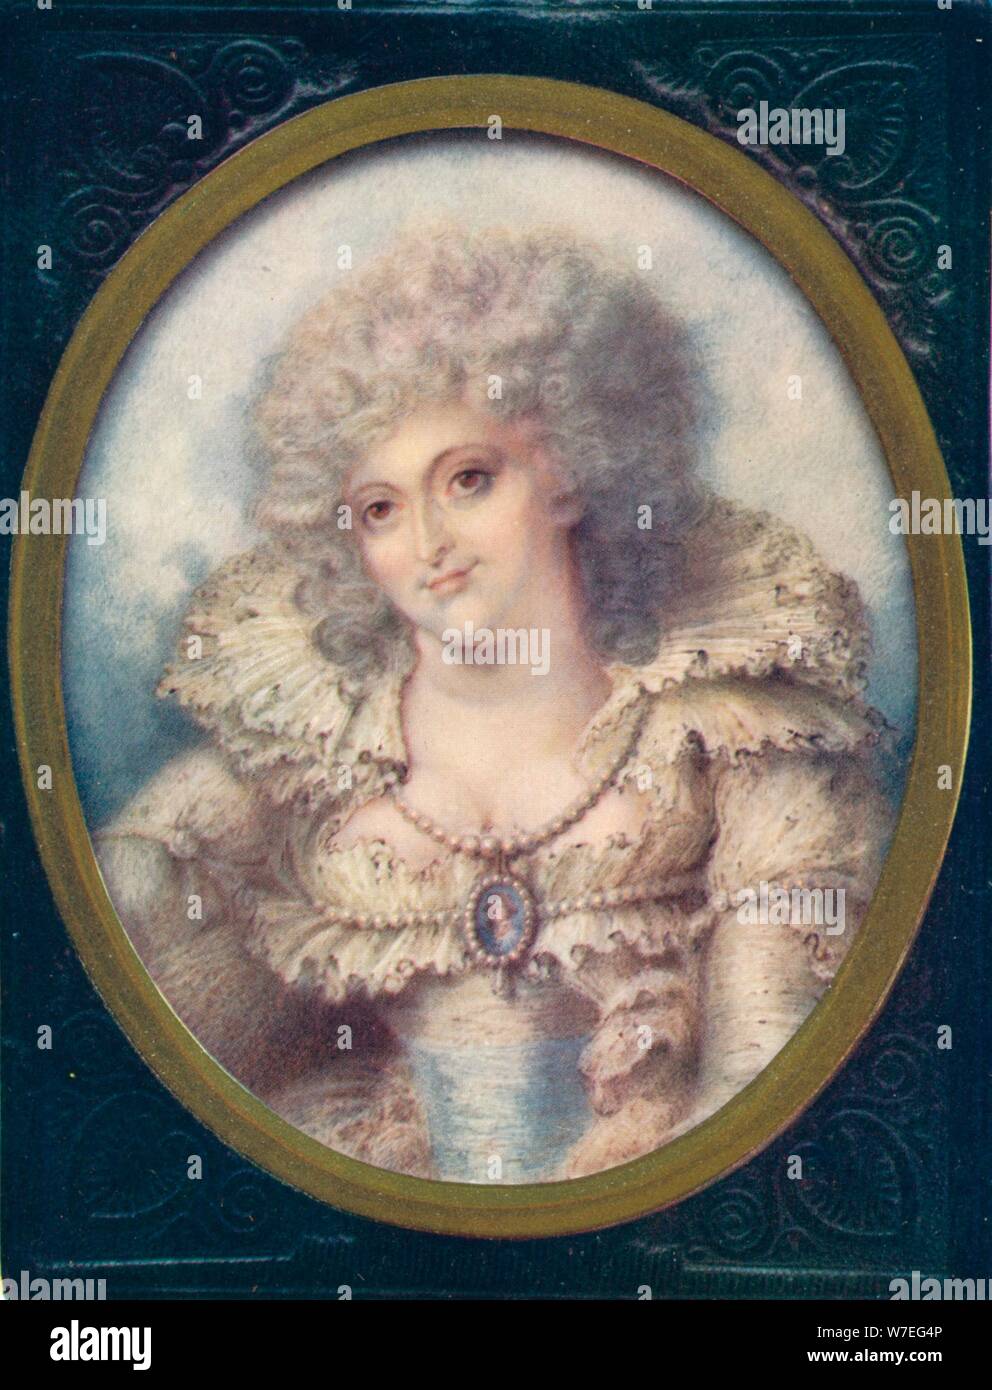 Mrs Fitzherbert, 1907. The longtime companion of the future King George IV of the United Kingdom. Artist: Richard Cosway Stock Photo